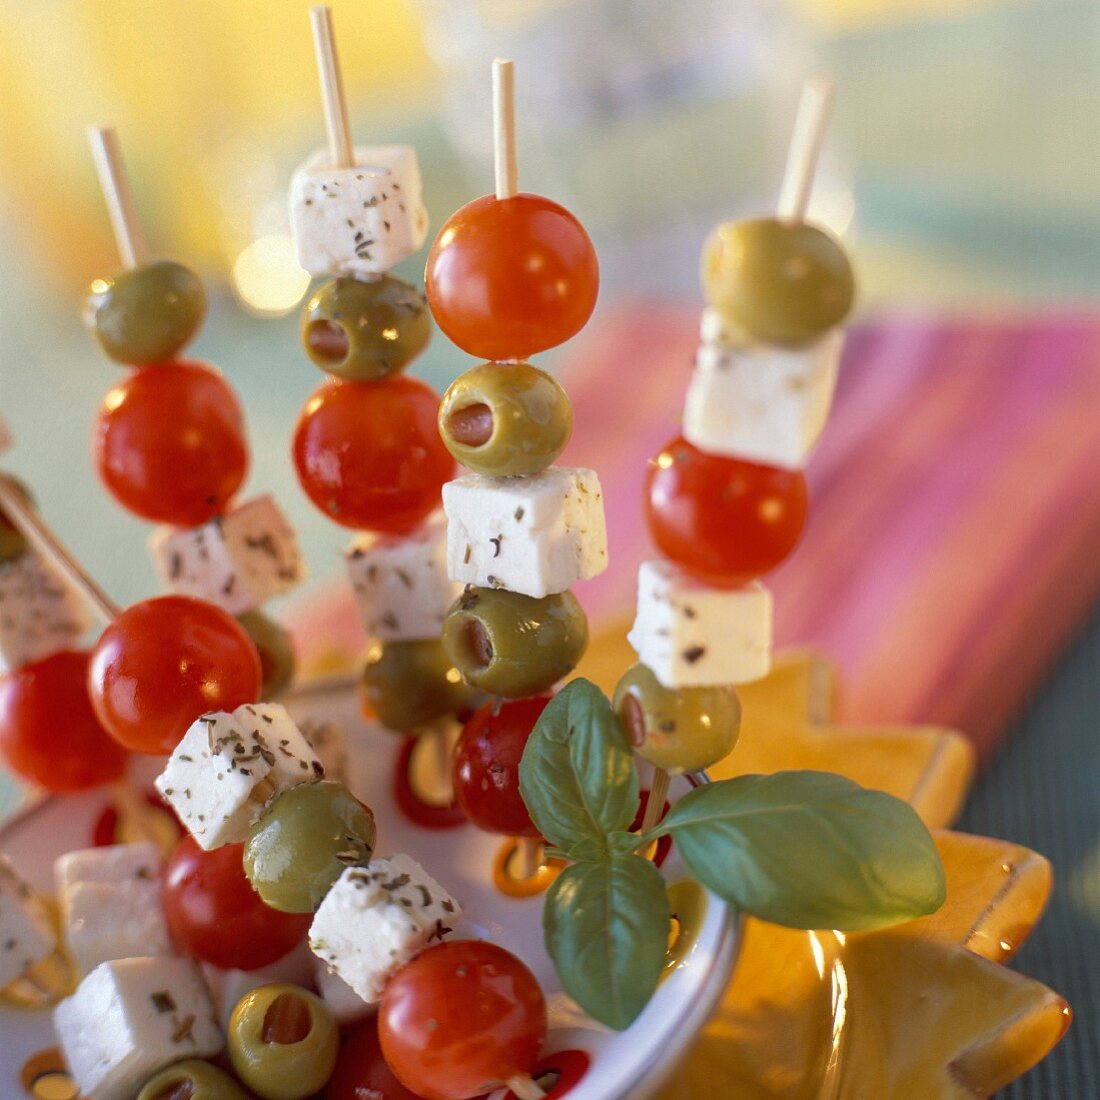 Cherry tomato, feta and olive skewers